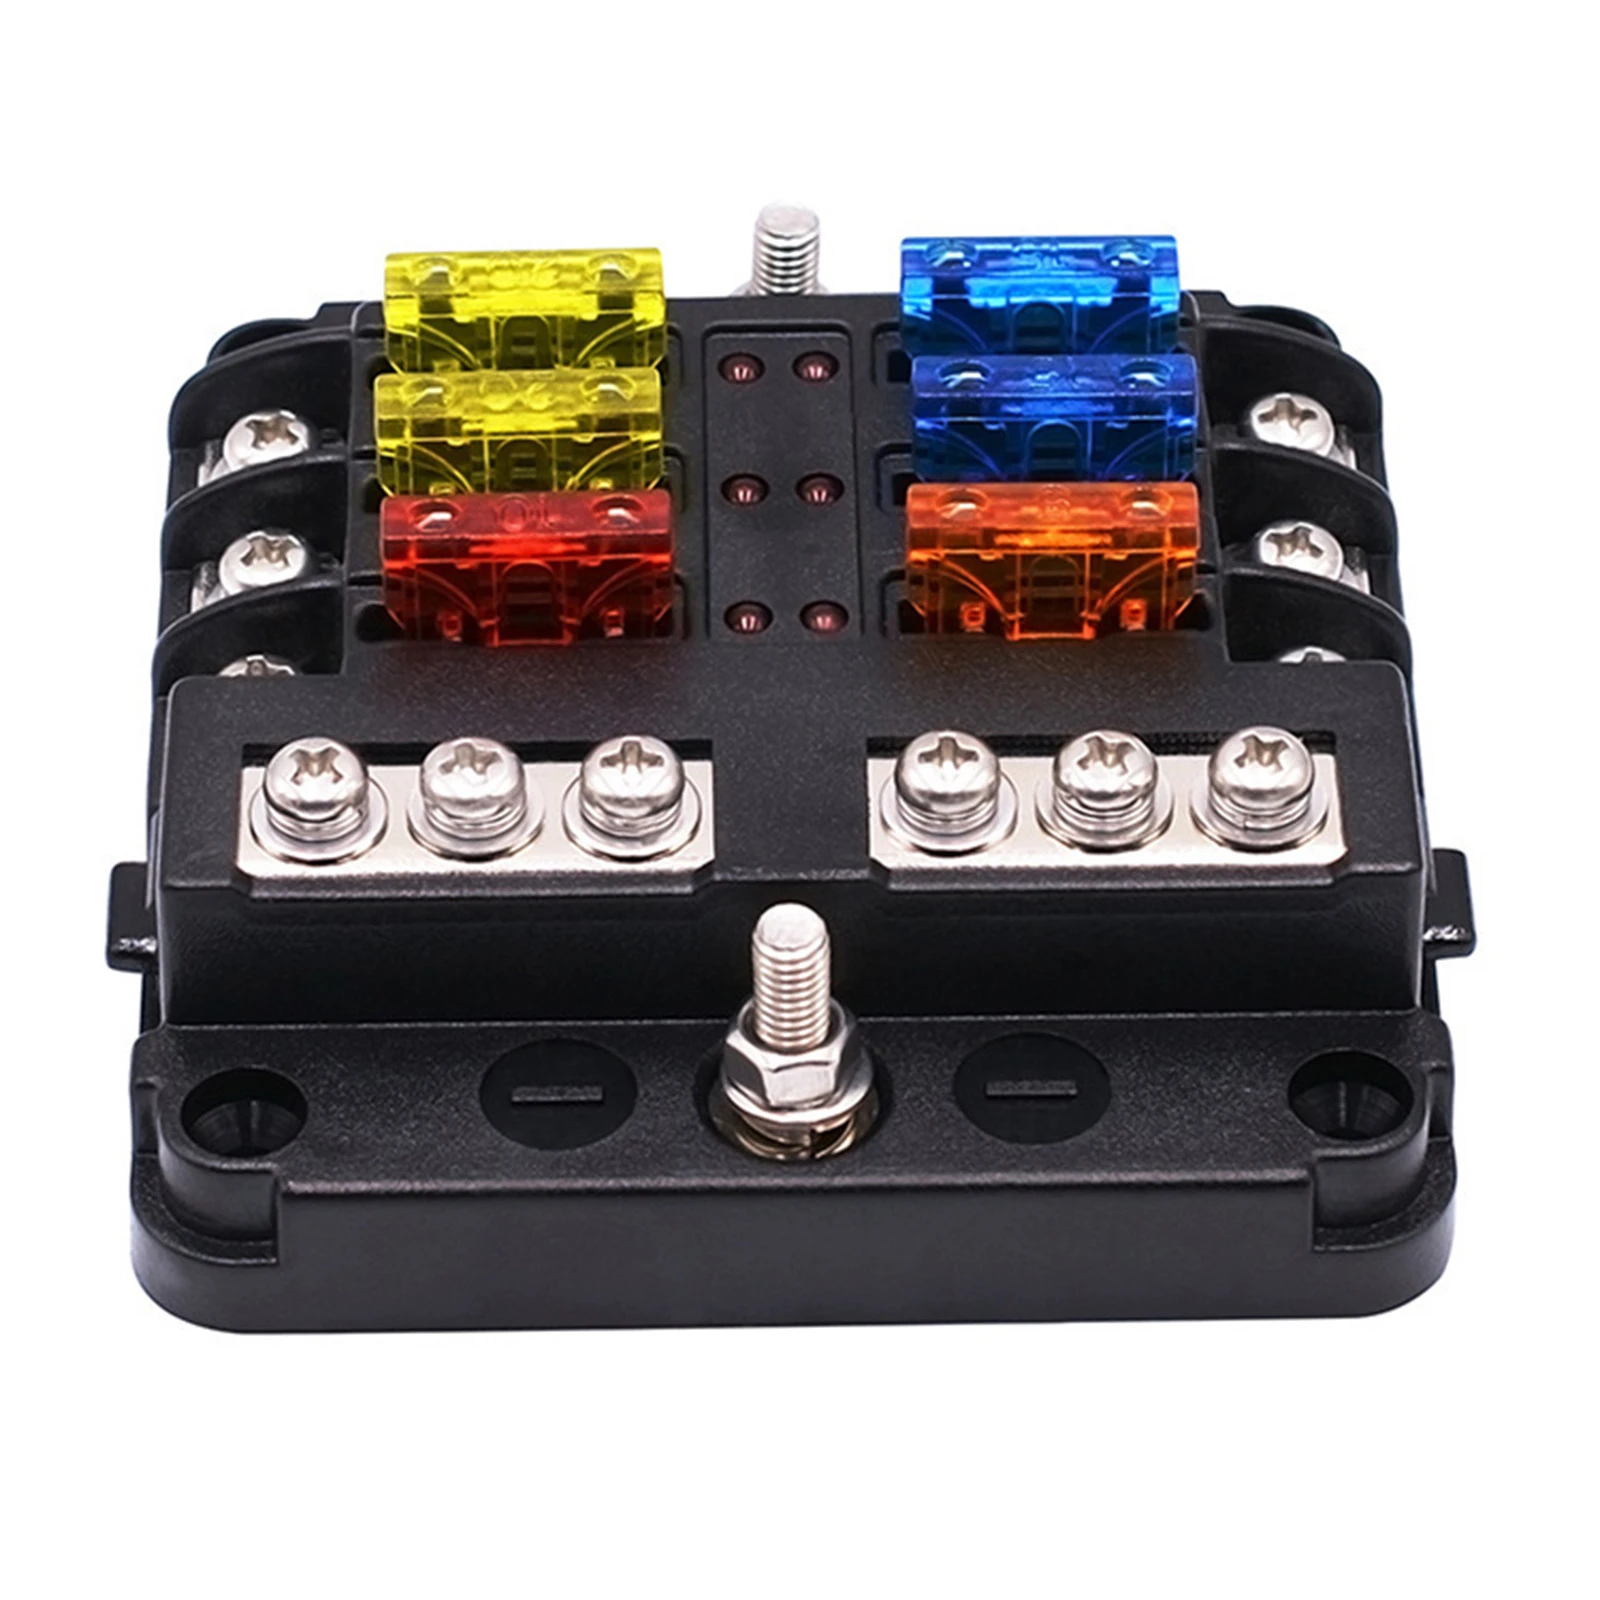 Cars LED Light Indicator & Protective Cover For Vehicles Boats 6-Way Fuse Block ATC/ATO Fuse Box With Ground Automotive Marine 